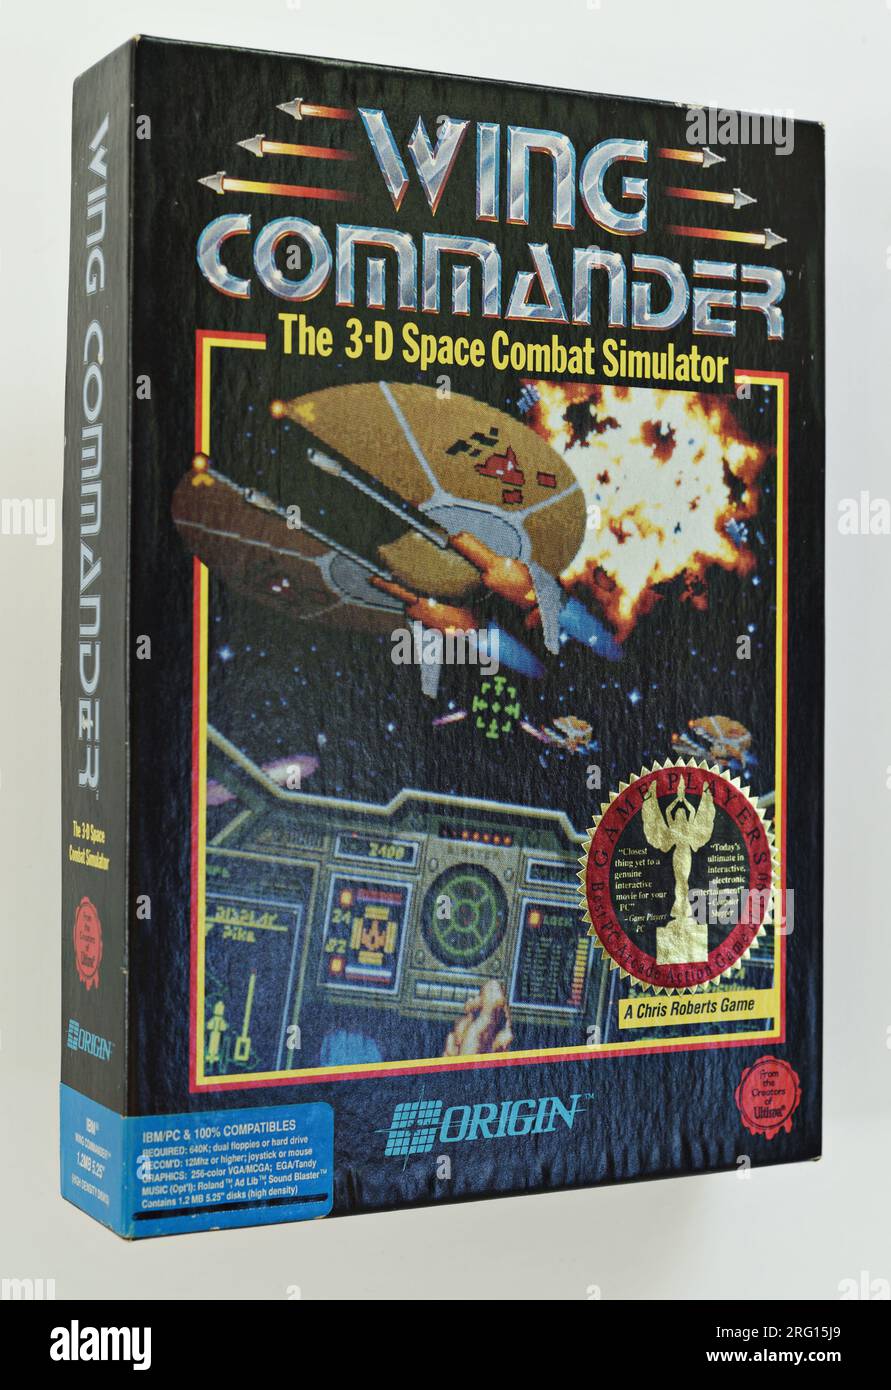 Wing Commander, The 3-D Space Combat Simulator – Front Box Art, science fiction space flight simulation 1990 MS-DOS computer game, for IBM & PC Stock Photo